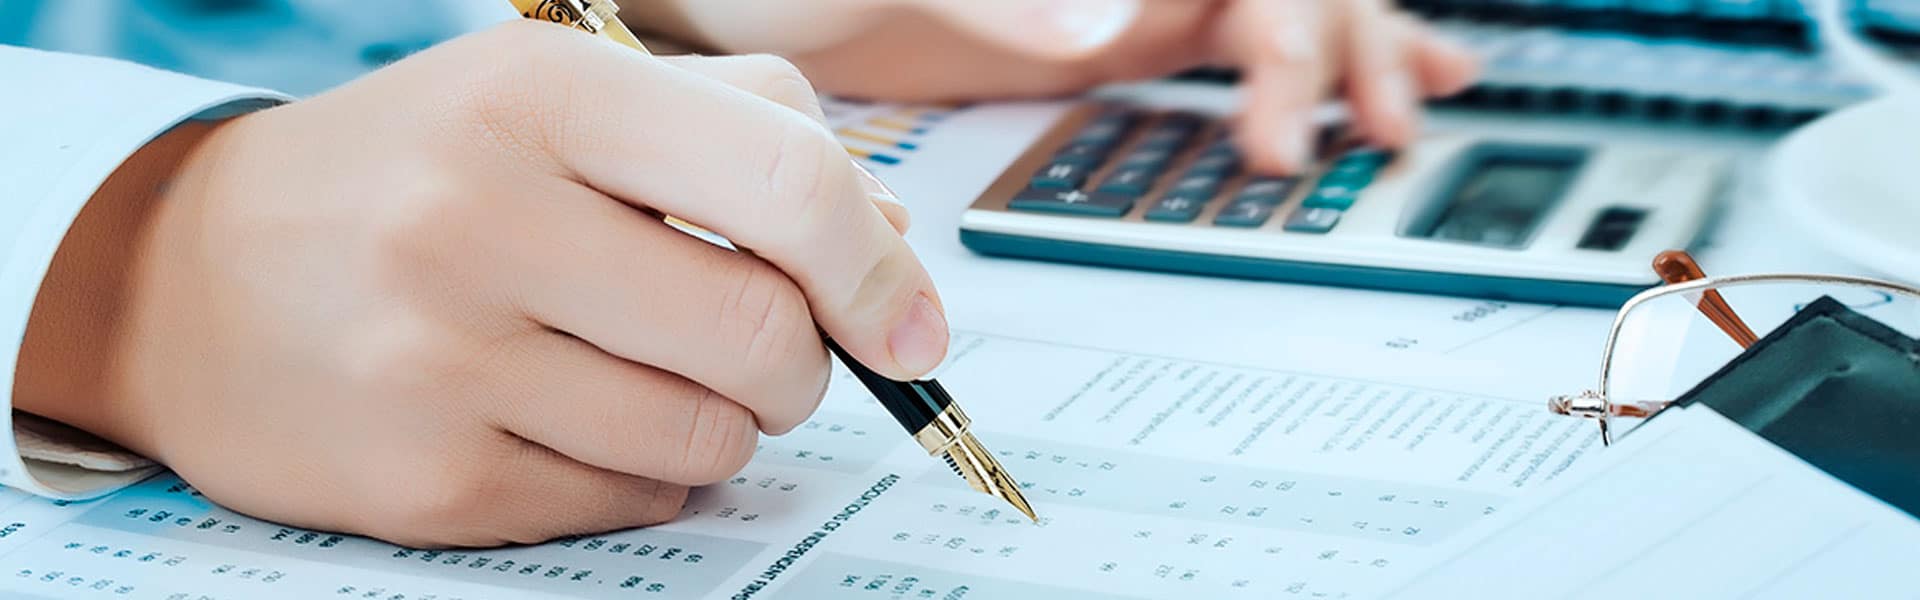 Benefits of bookkeeping in companies